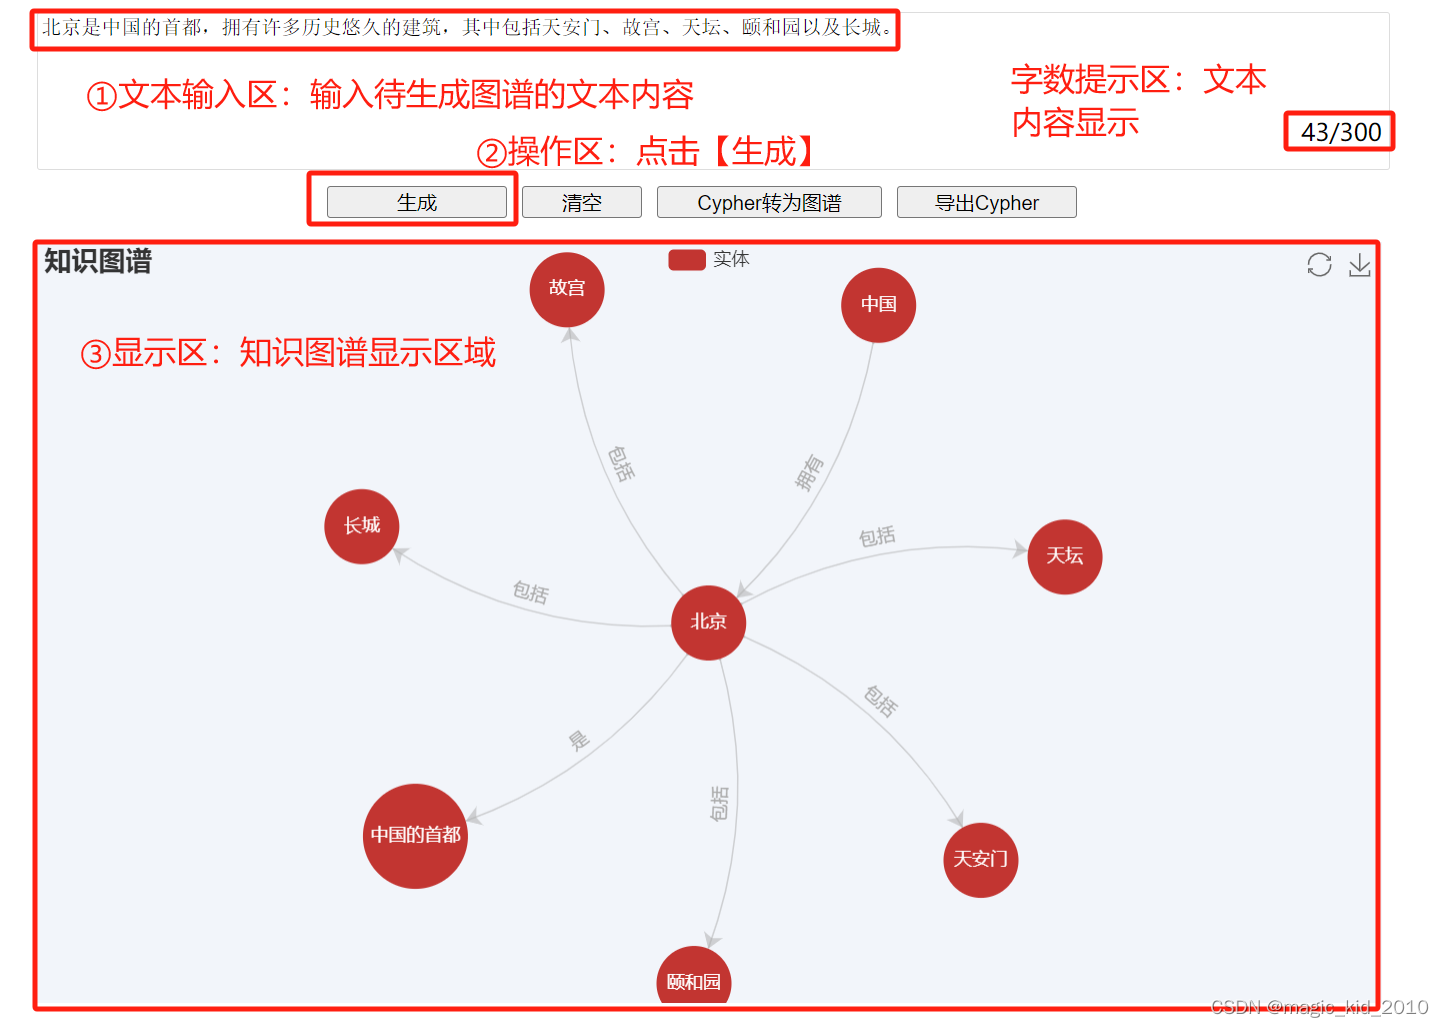 <span style='color:red;'>图</span>数据库 之 Neo4j <span style='color:red;'>与</span> <span style='color:red;'>AI</span> 大模型<span style='color:red;'>的</span><span style='color:red;'>结合</span><span style='color:red;'>绘制</span>知识图谱